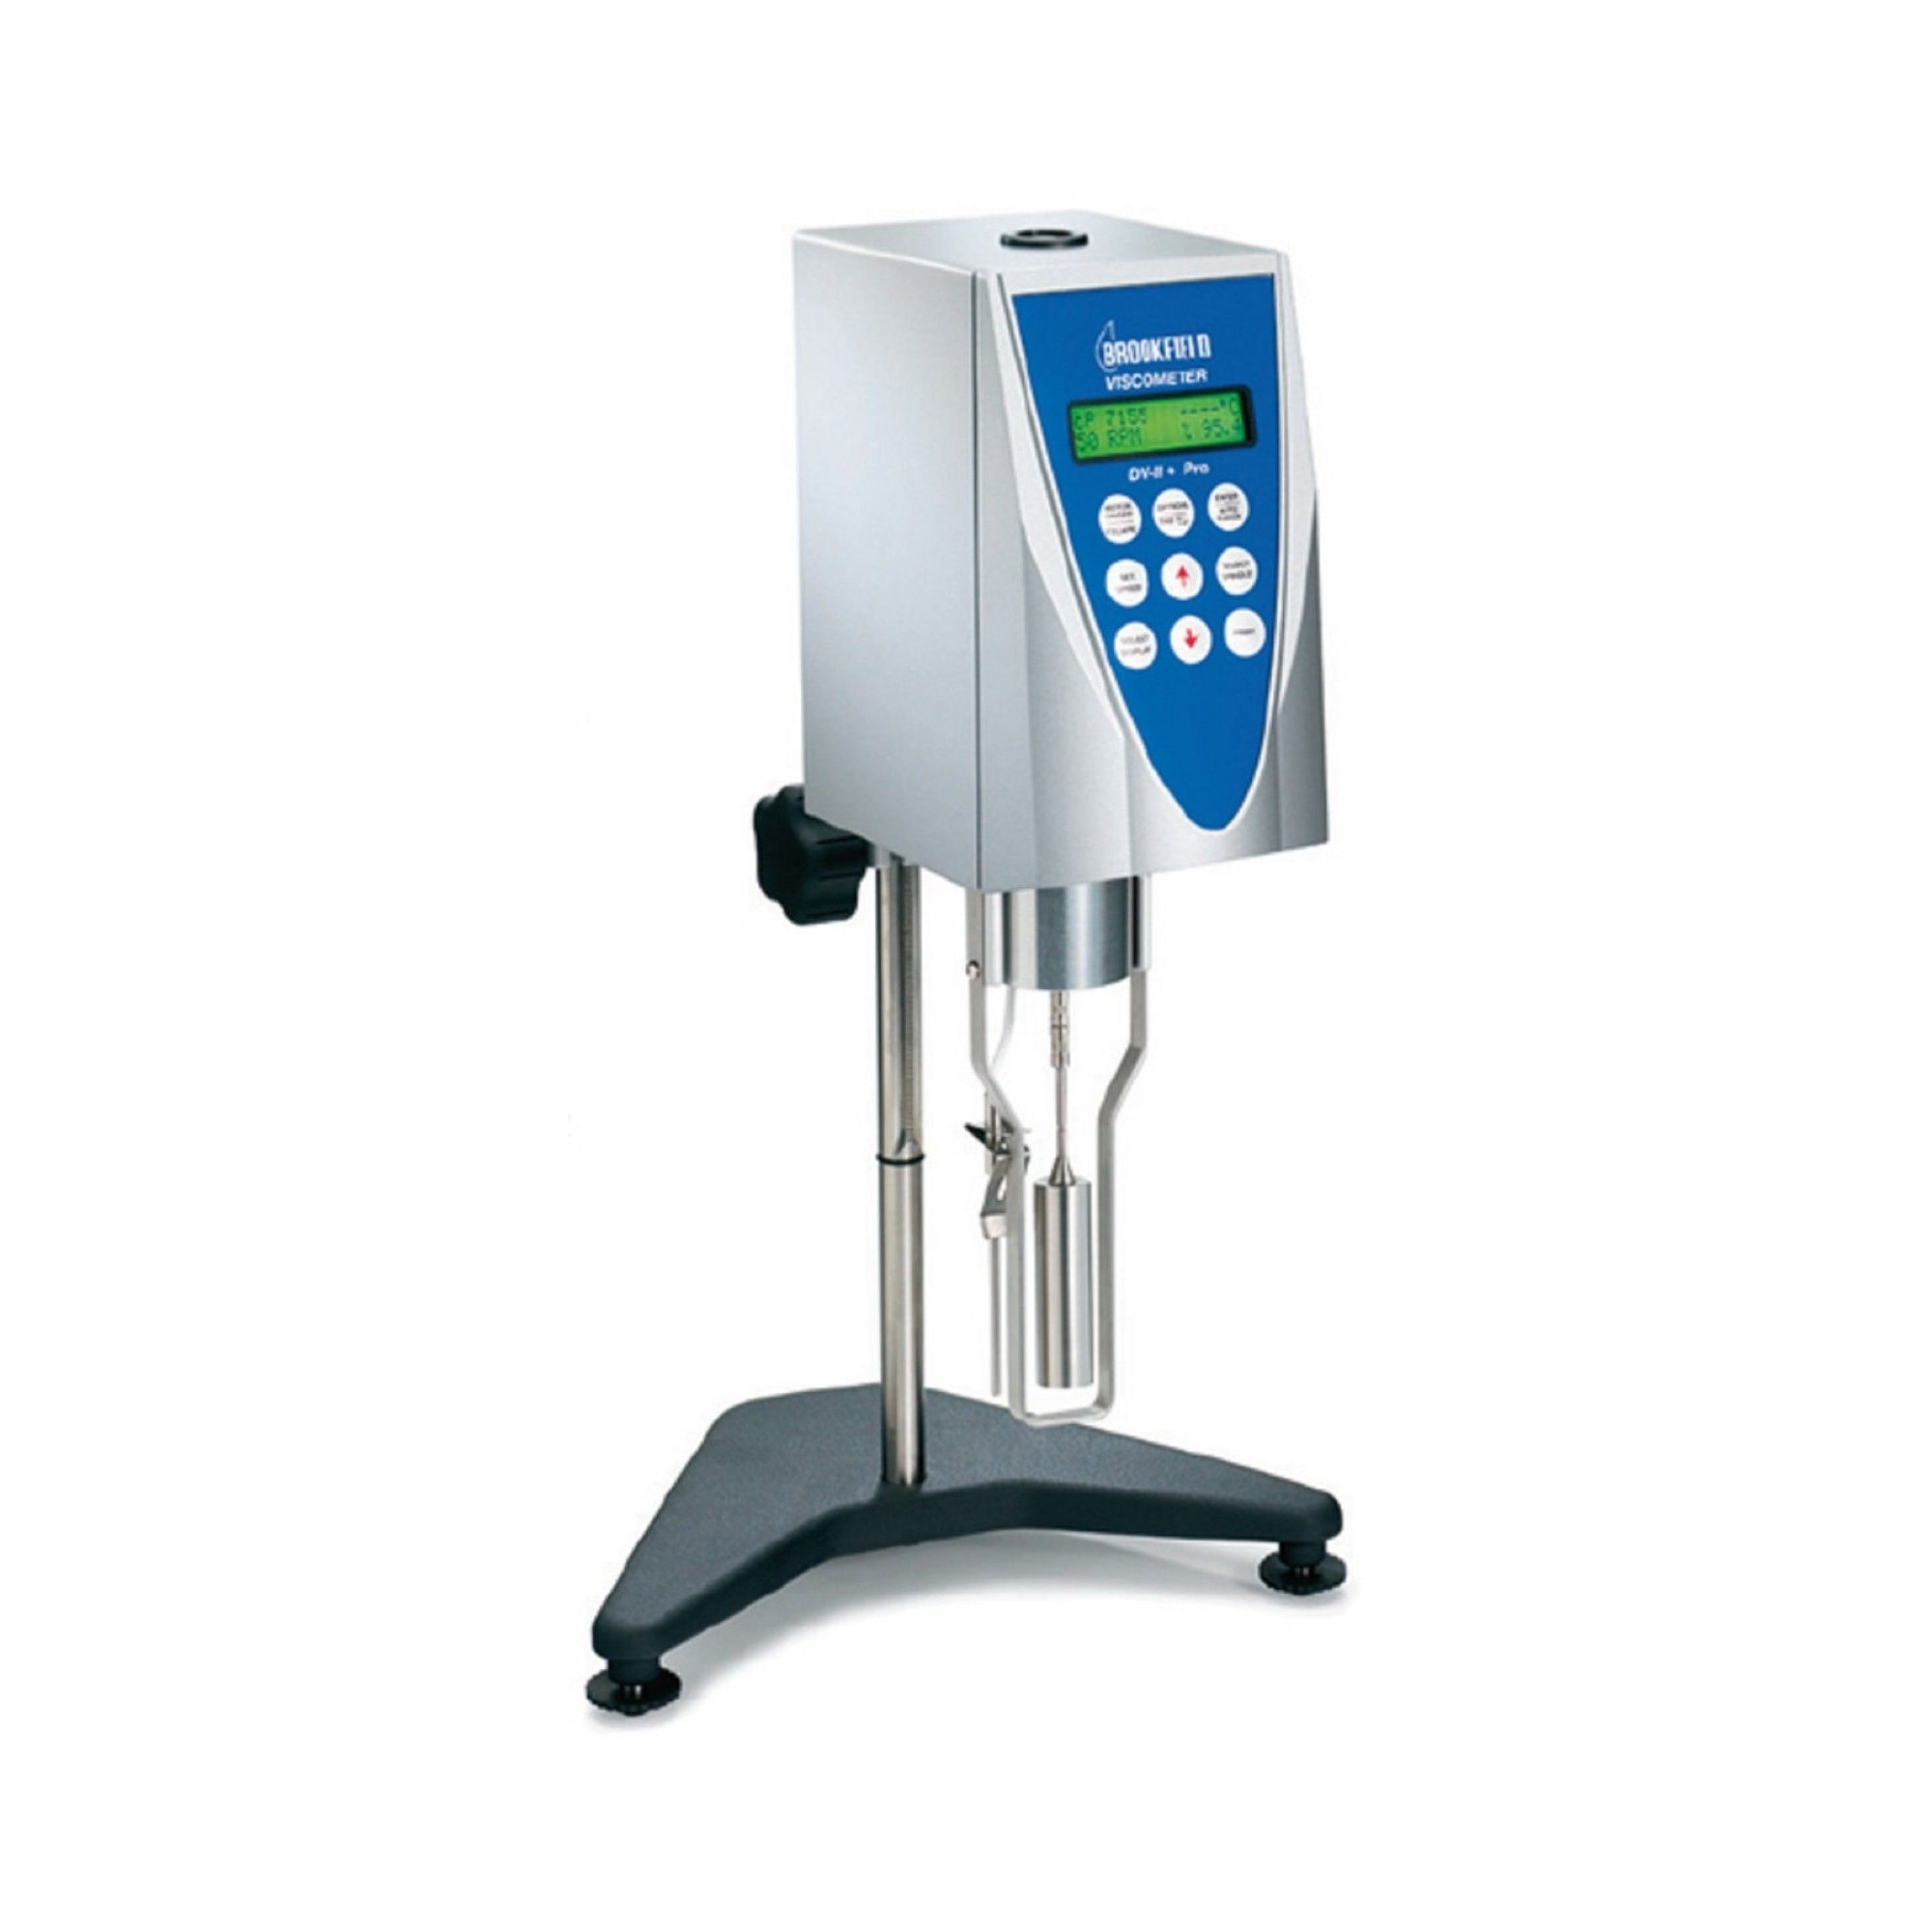 BROOKFIELD RVDVII+ PRO Digital Viscometer compete set with spindles and Stand